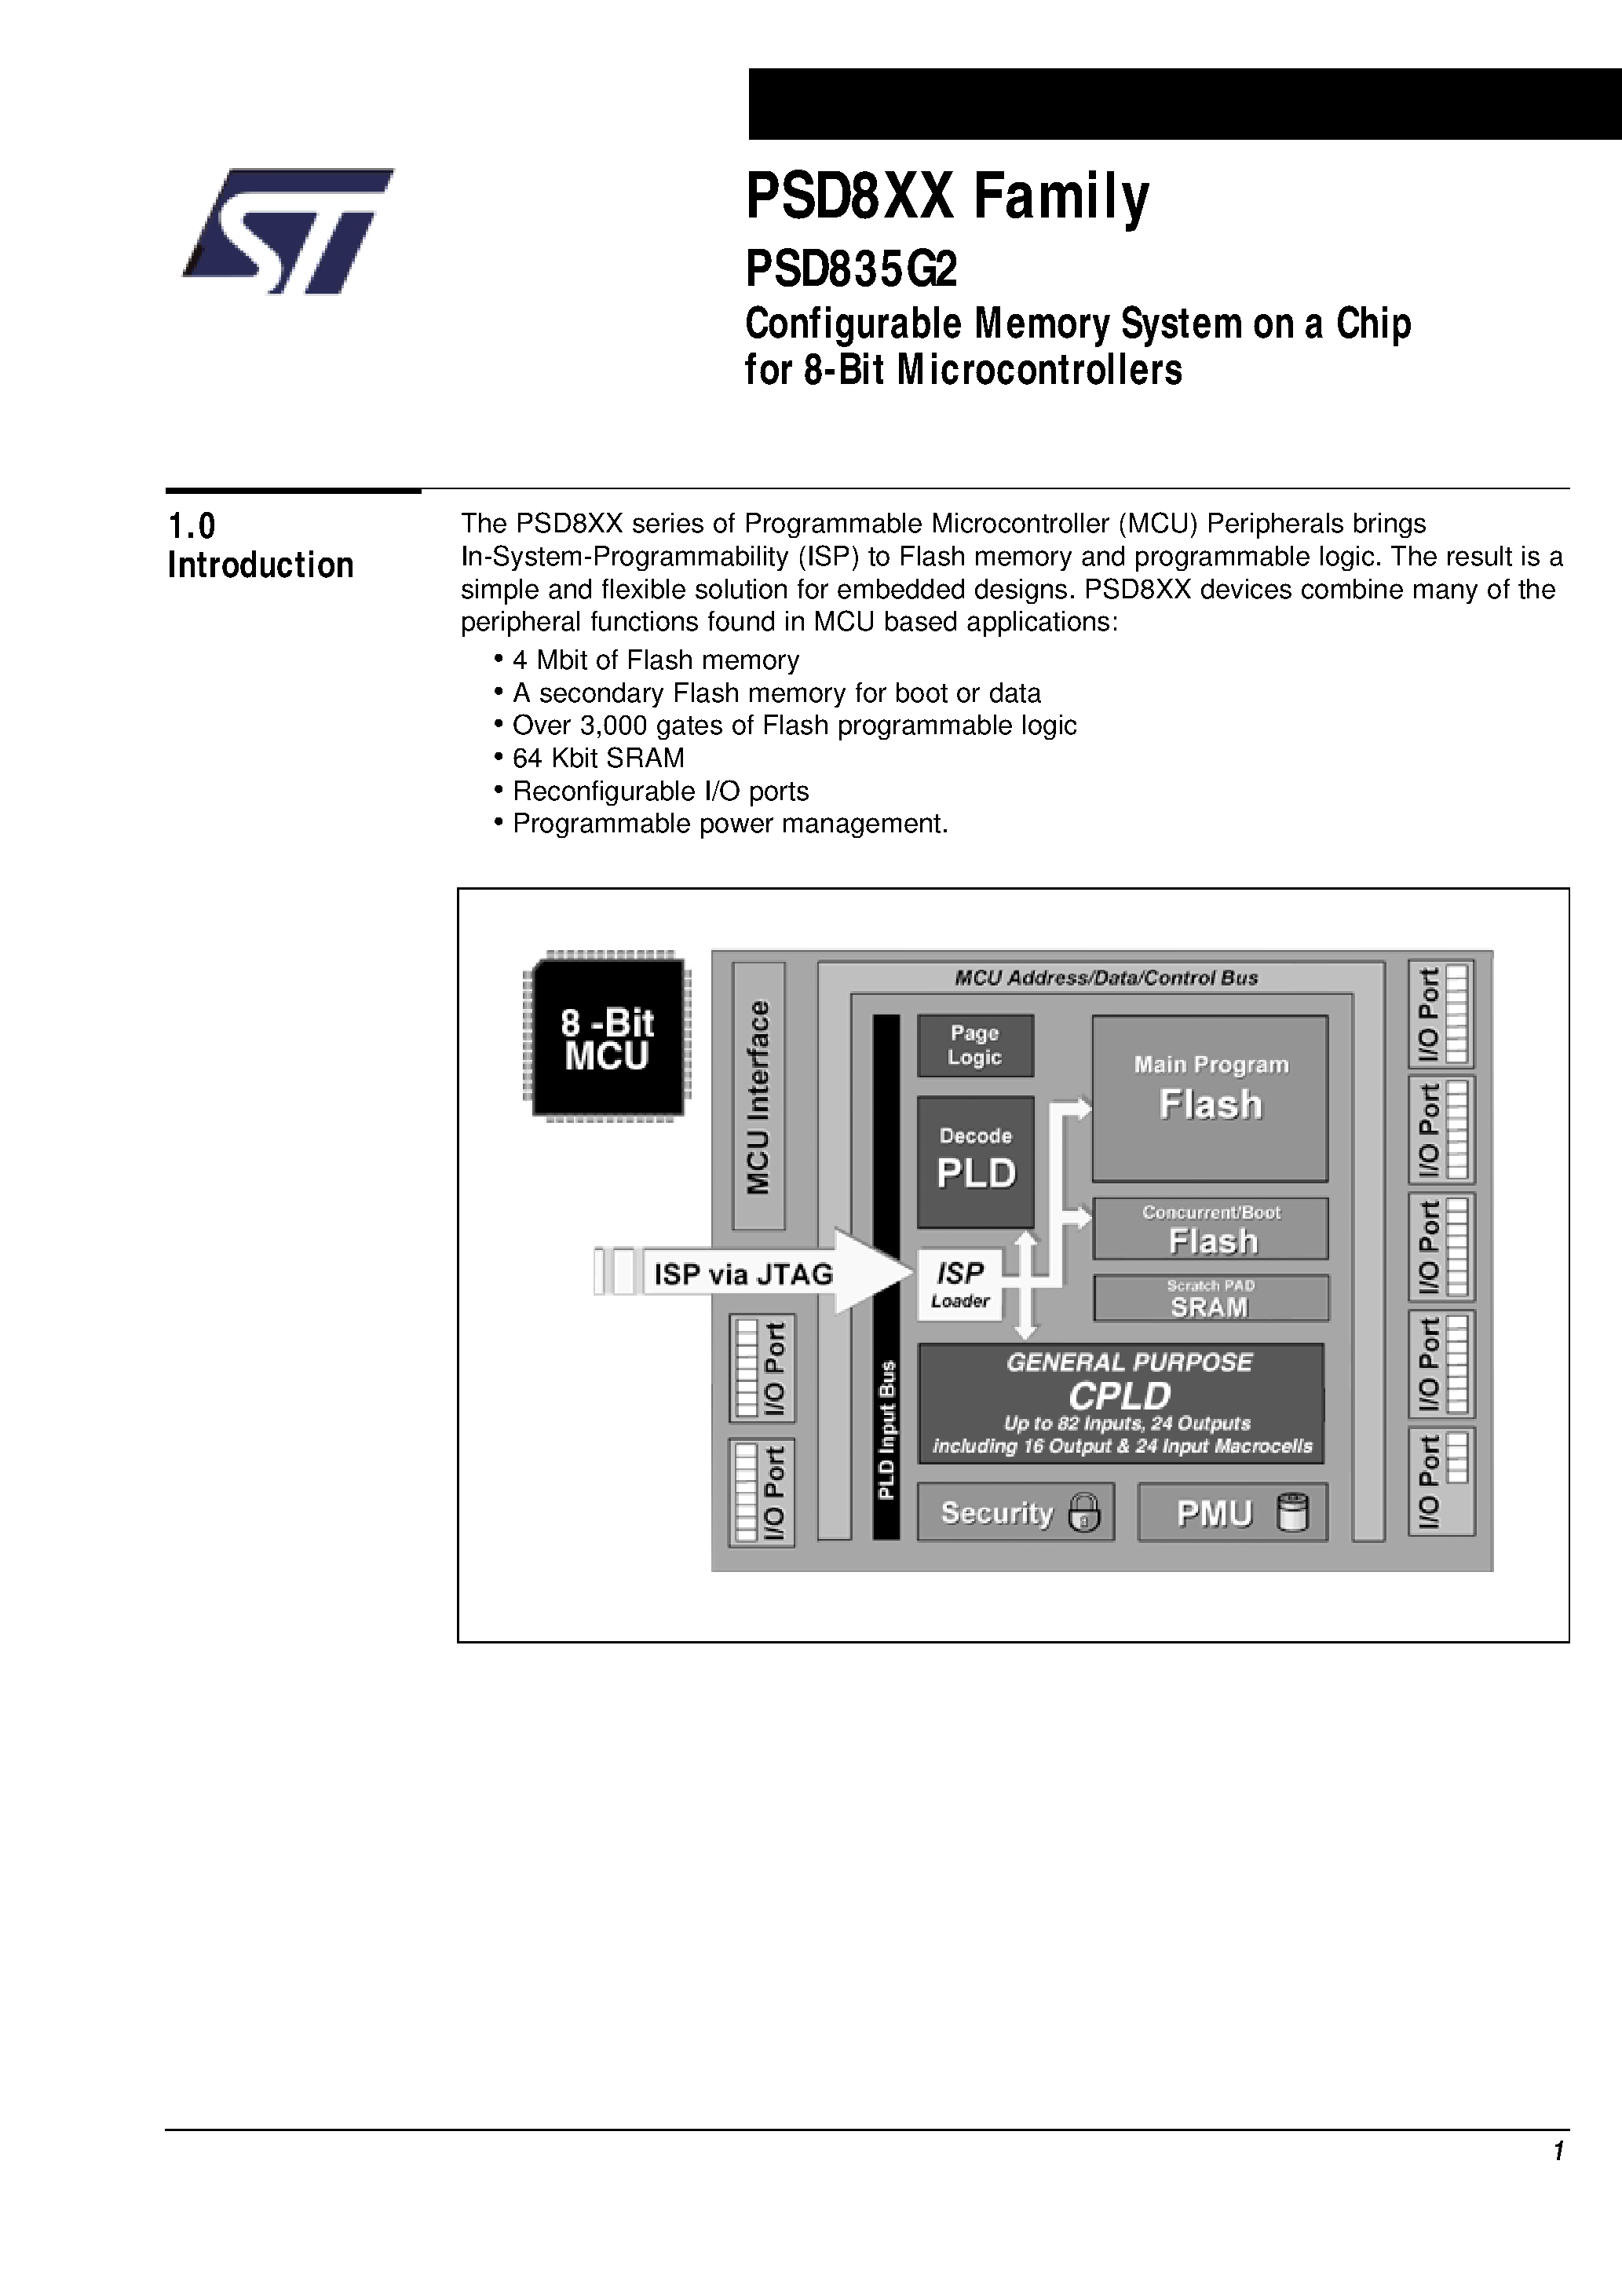 Datasheet PSD835F1V-A-70JI - Configurable Memory System on a Chip for 8-Bit Microcontrollers page 2